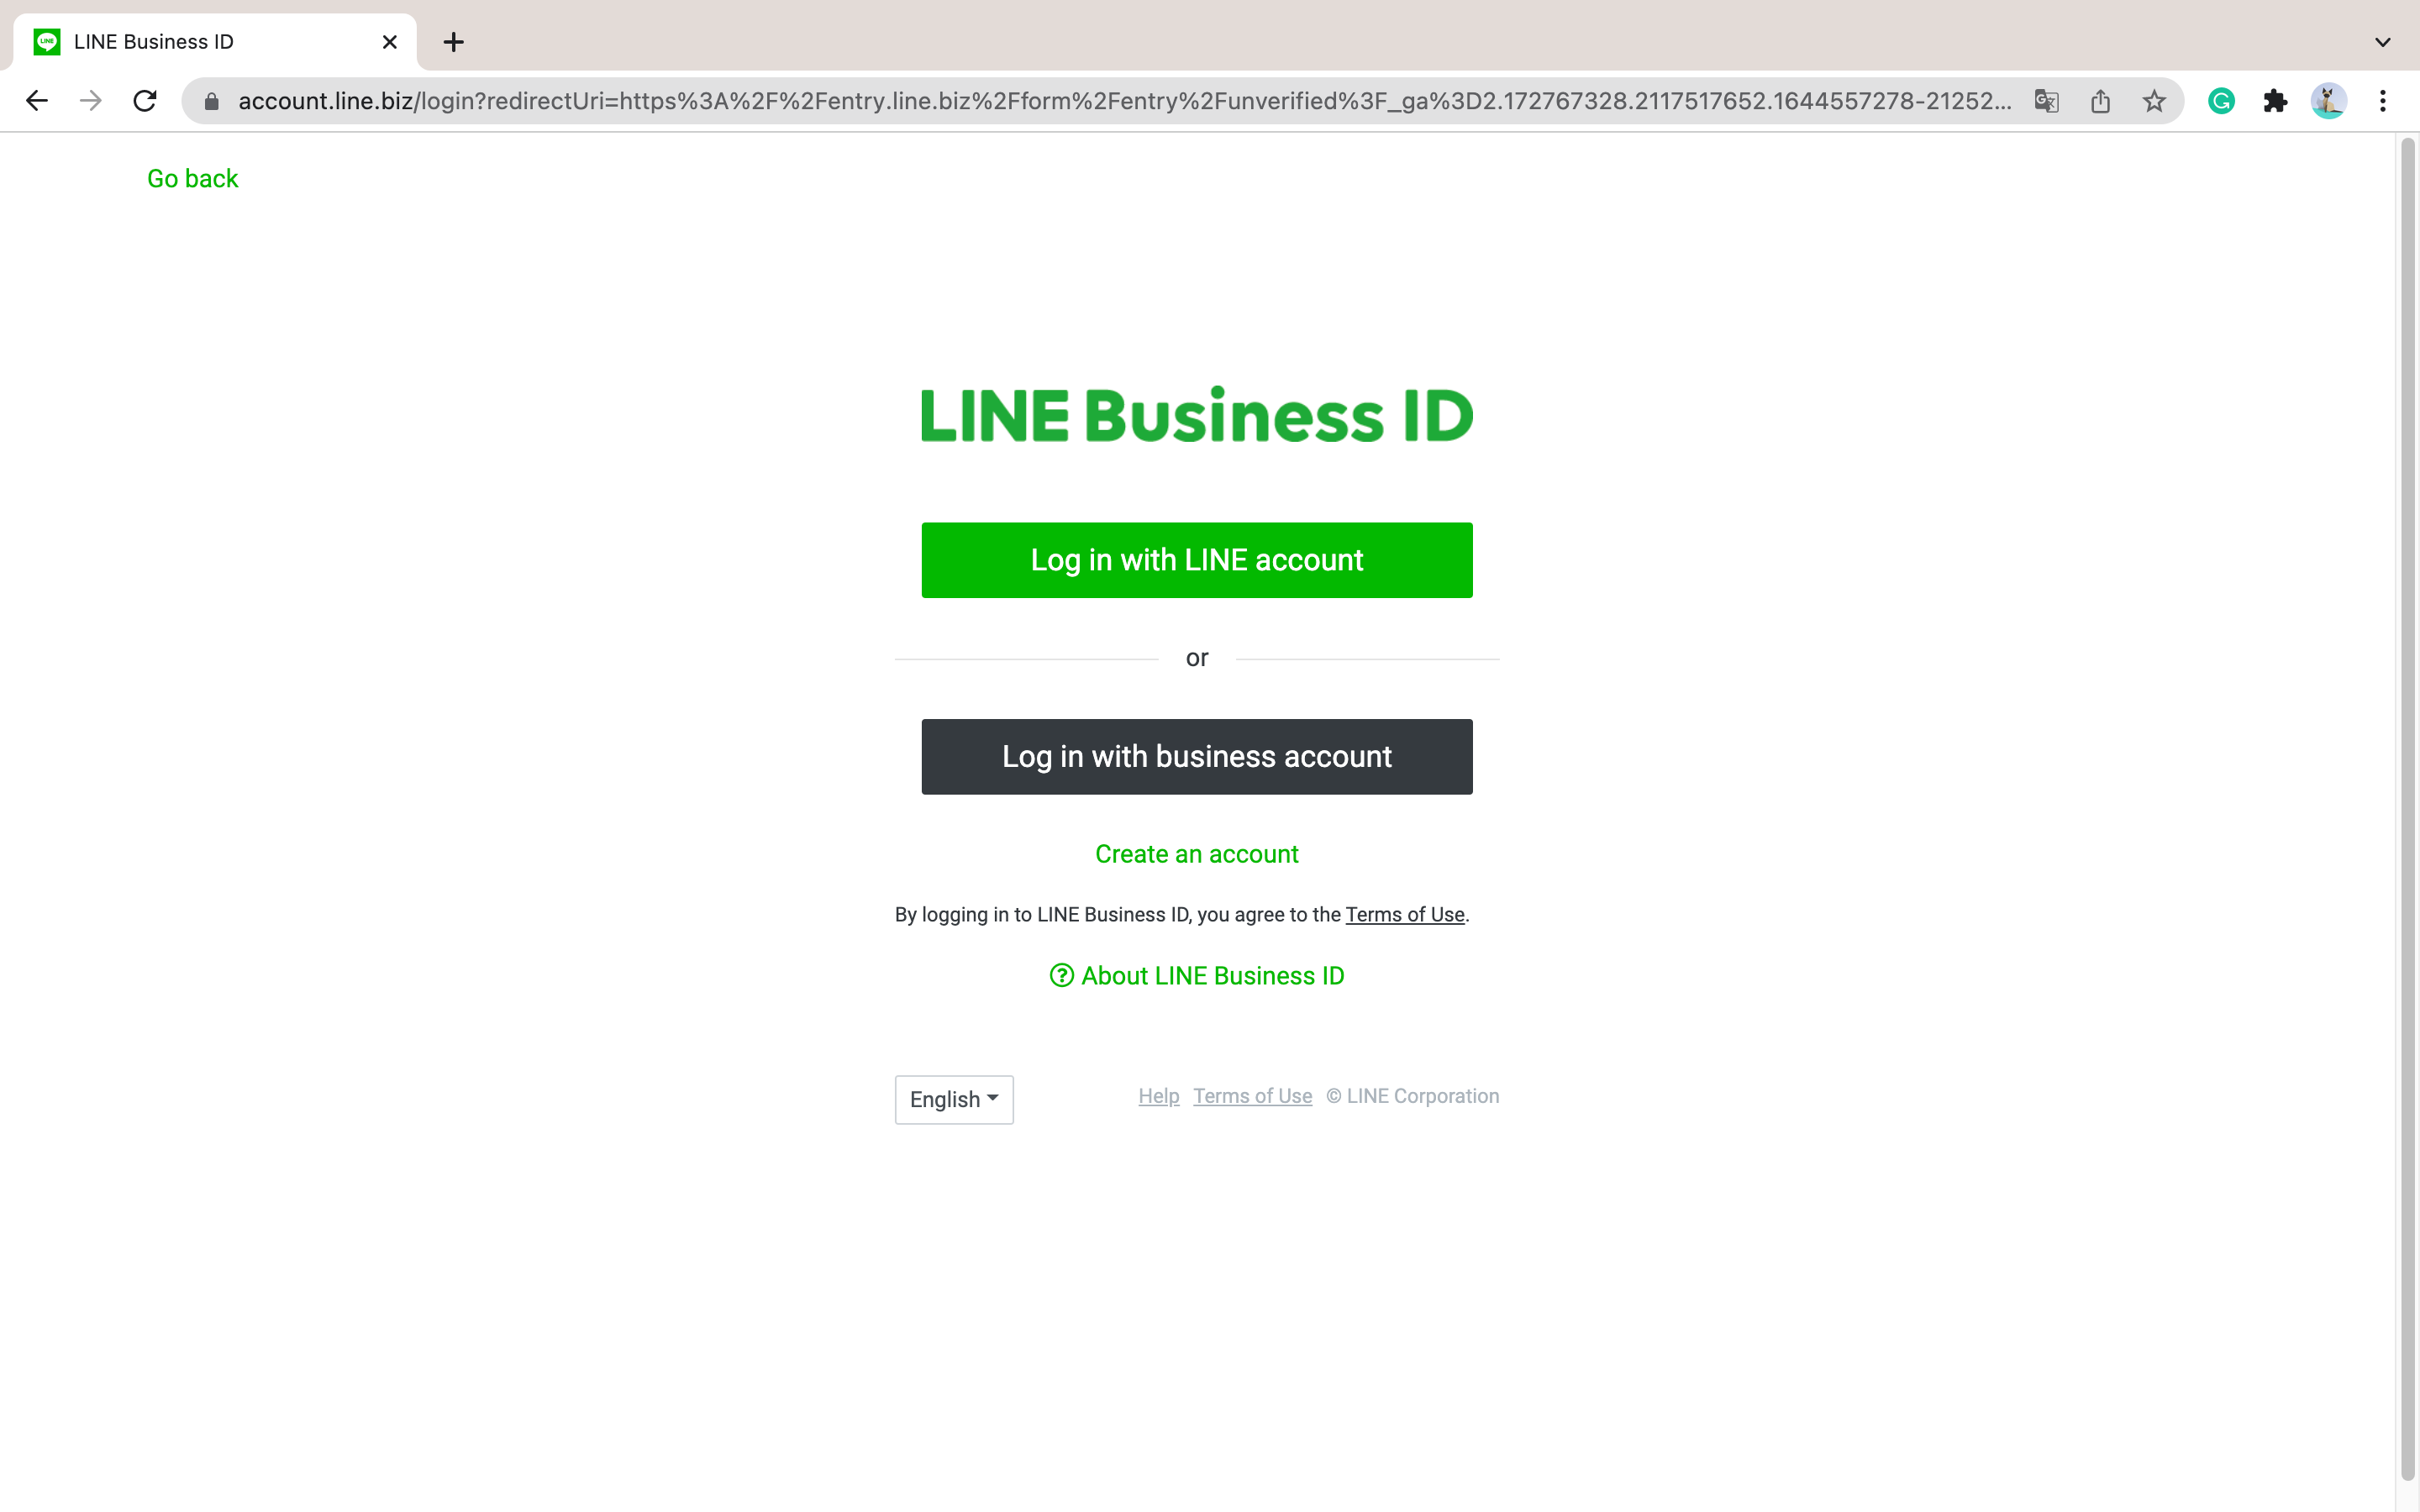 Log in with LINE account